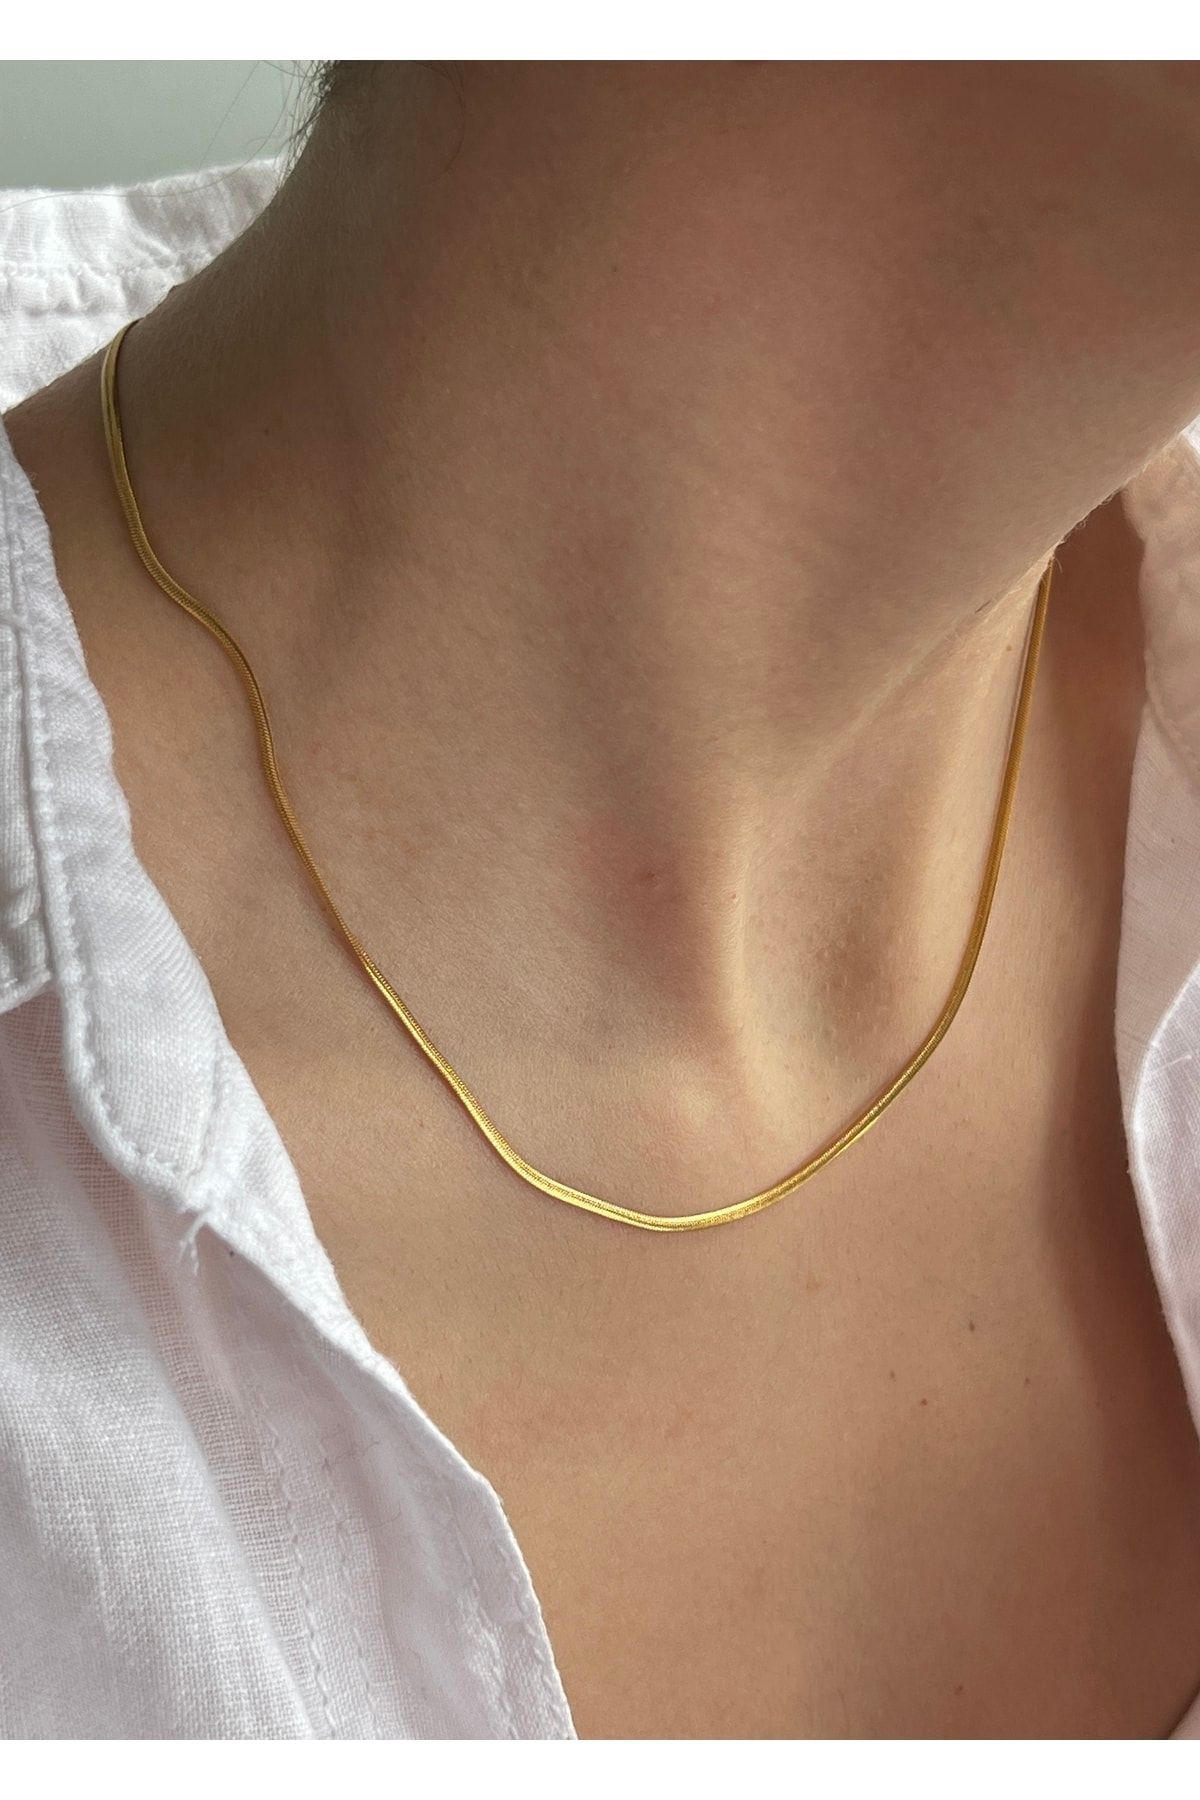 Simple|stainless Steel Snake Chain Choker Necklace For Women - Minimalist  Gold Pendant